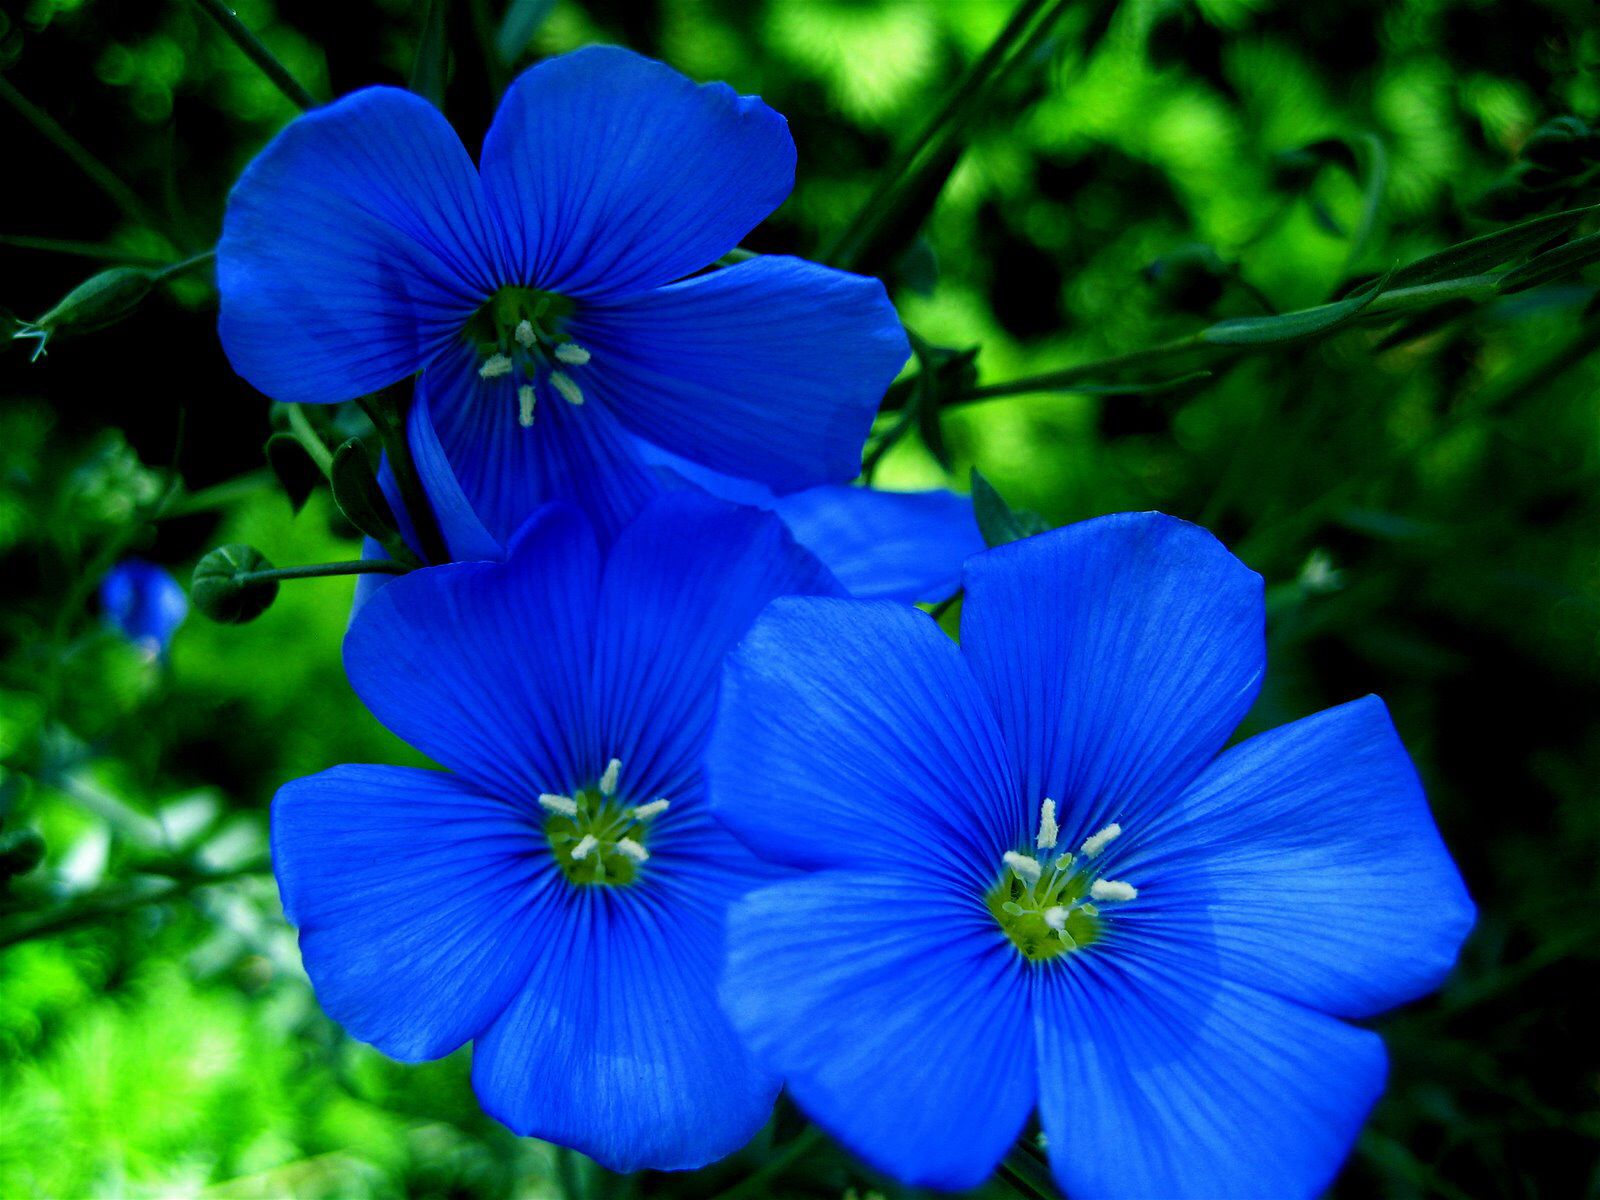 Image from http://whatcomflowers.net/wp-content/uploads/2014/11/Blue ...